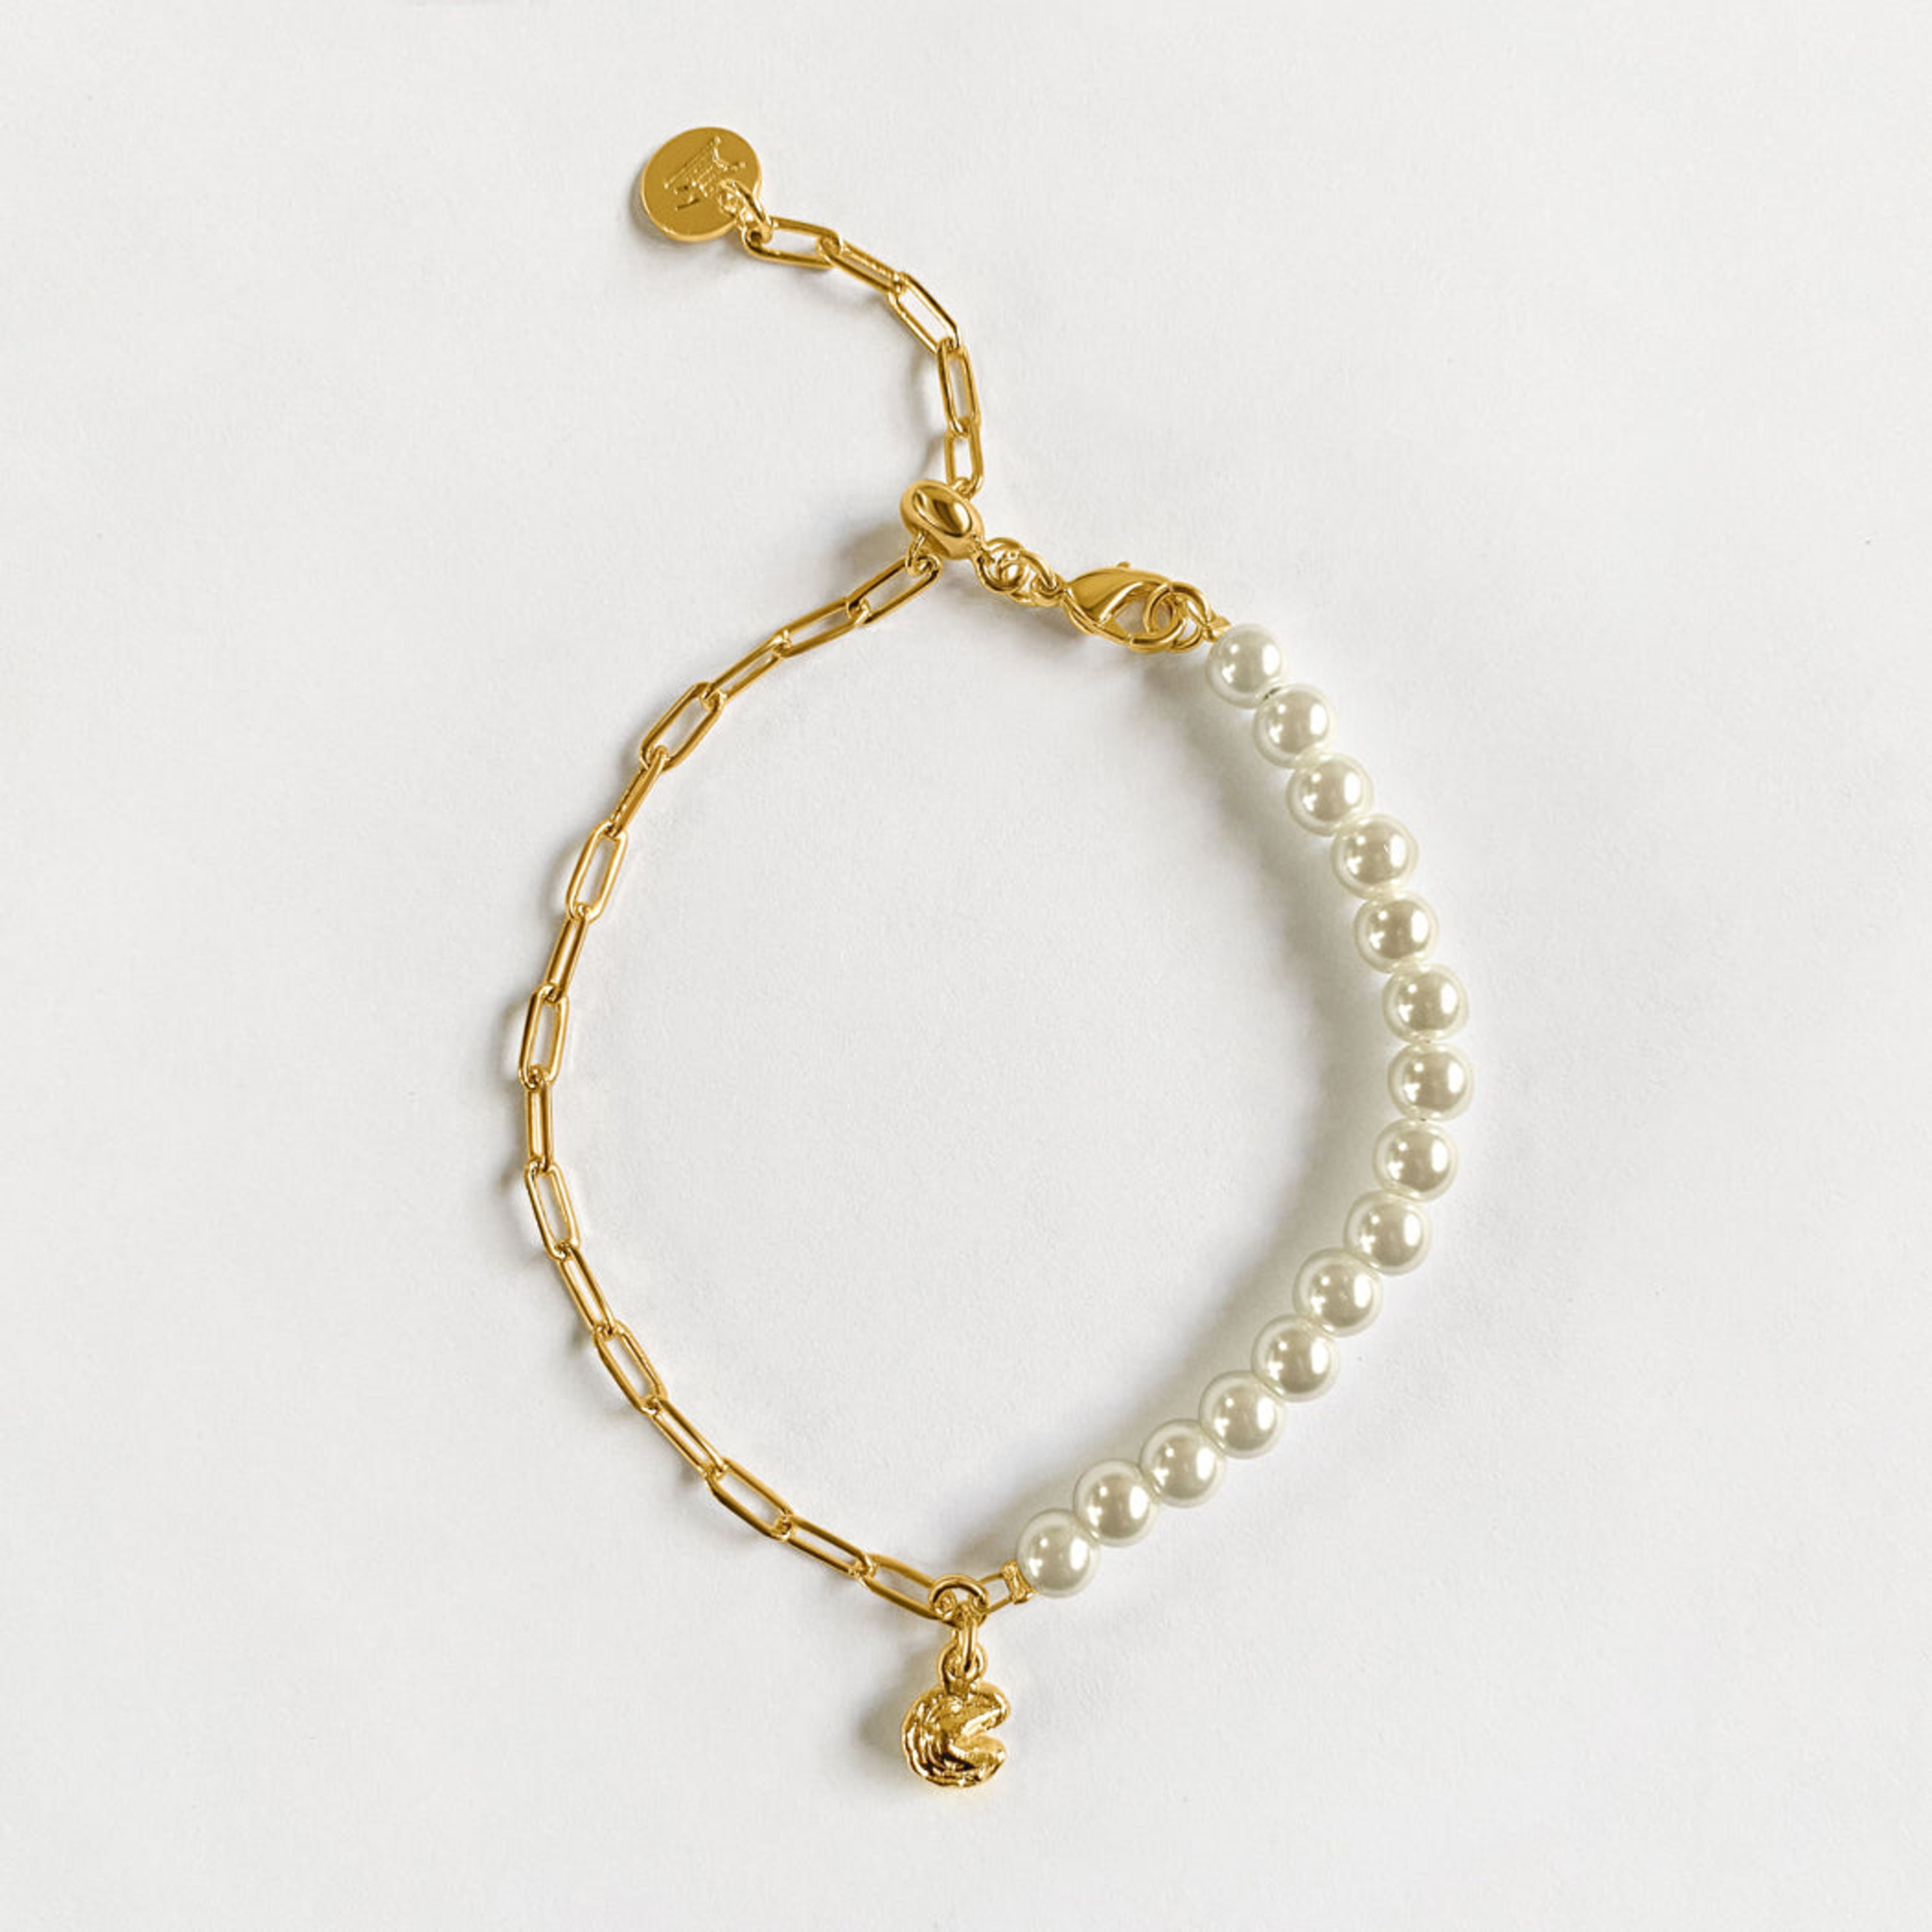 Fortune Cookie Pearl Bracelet - Gold